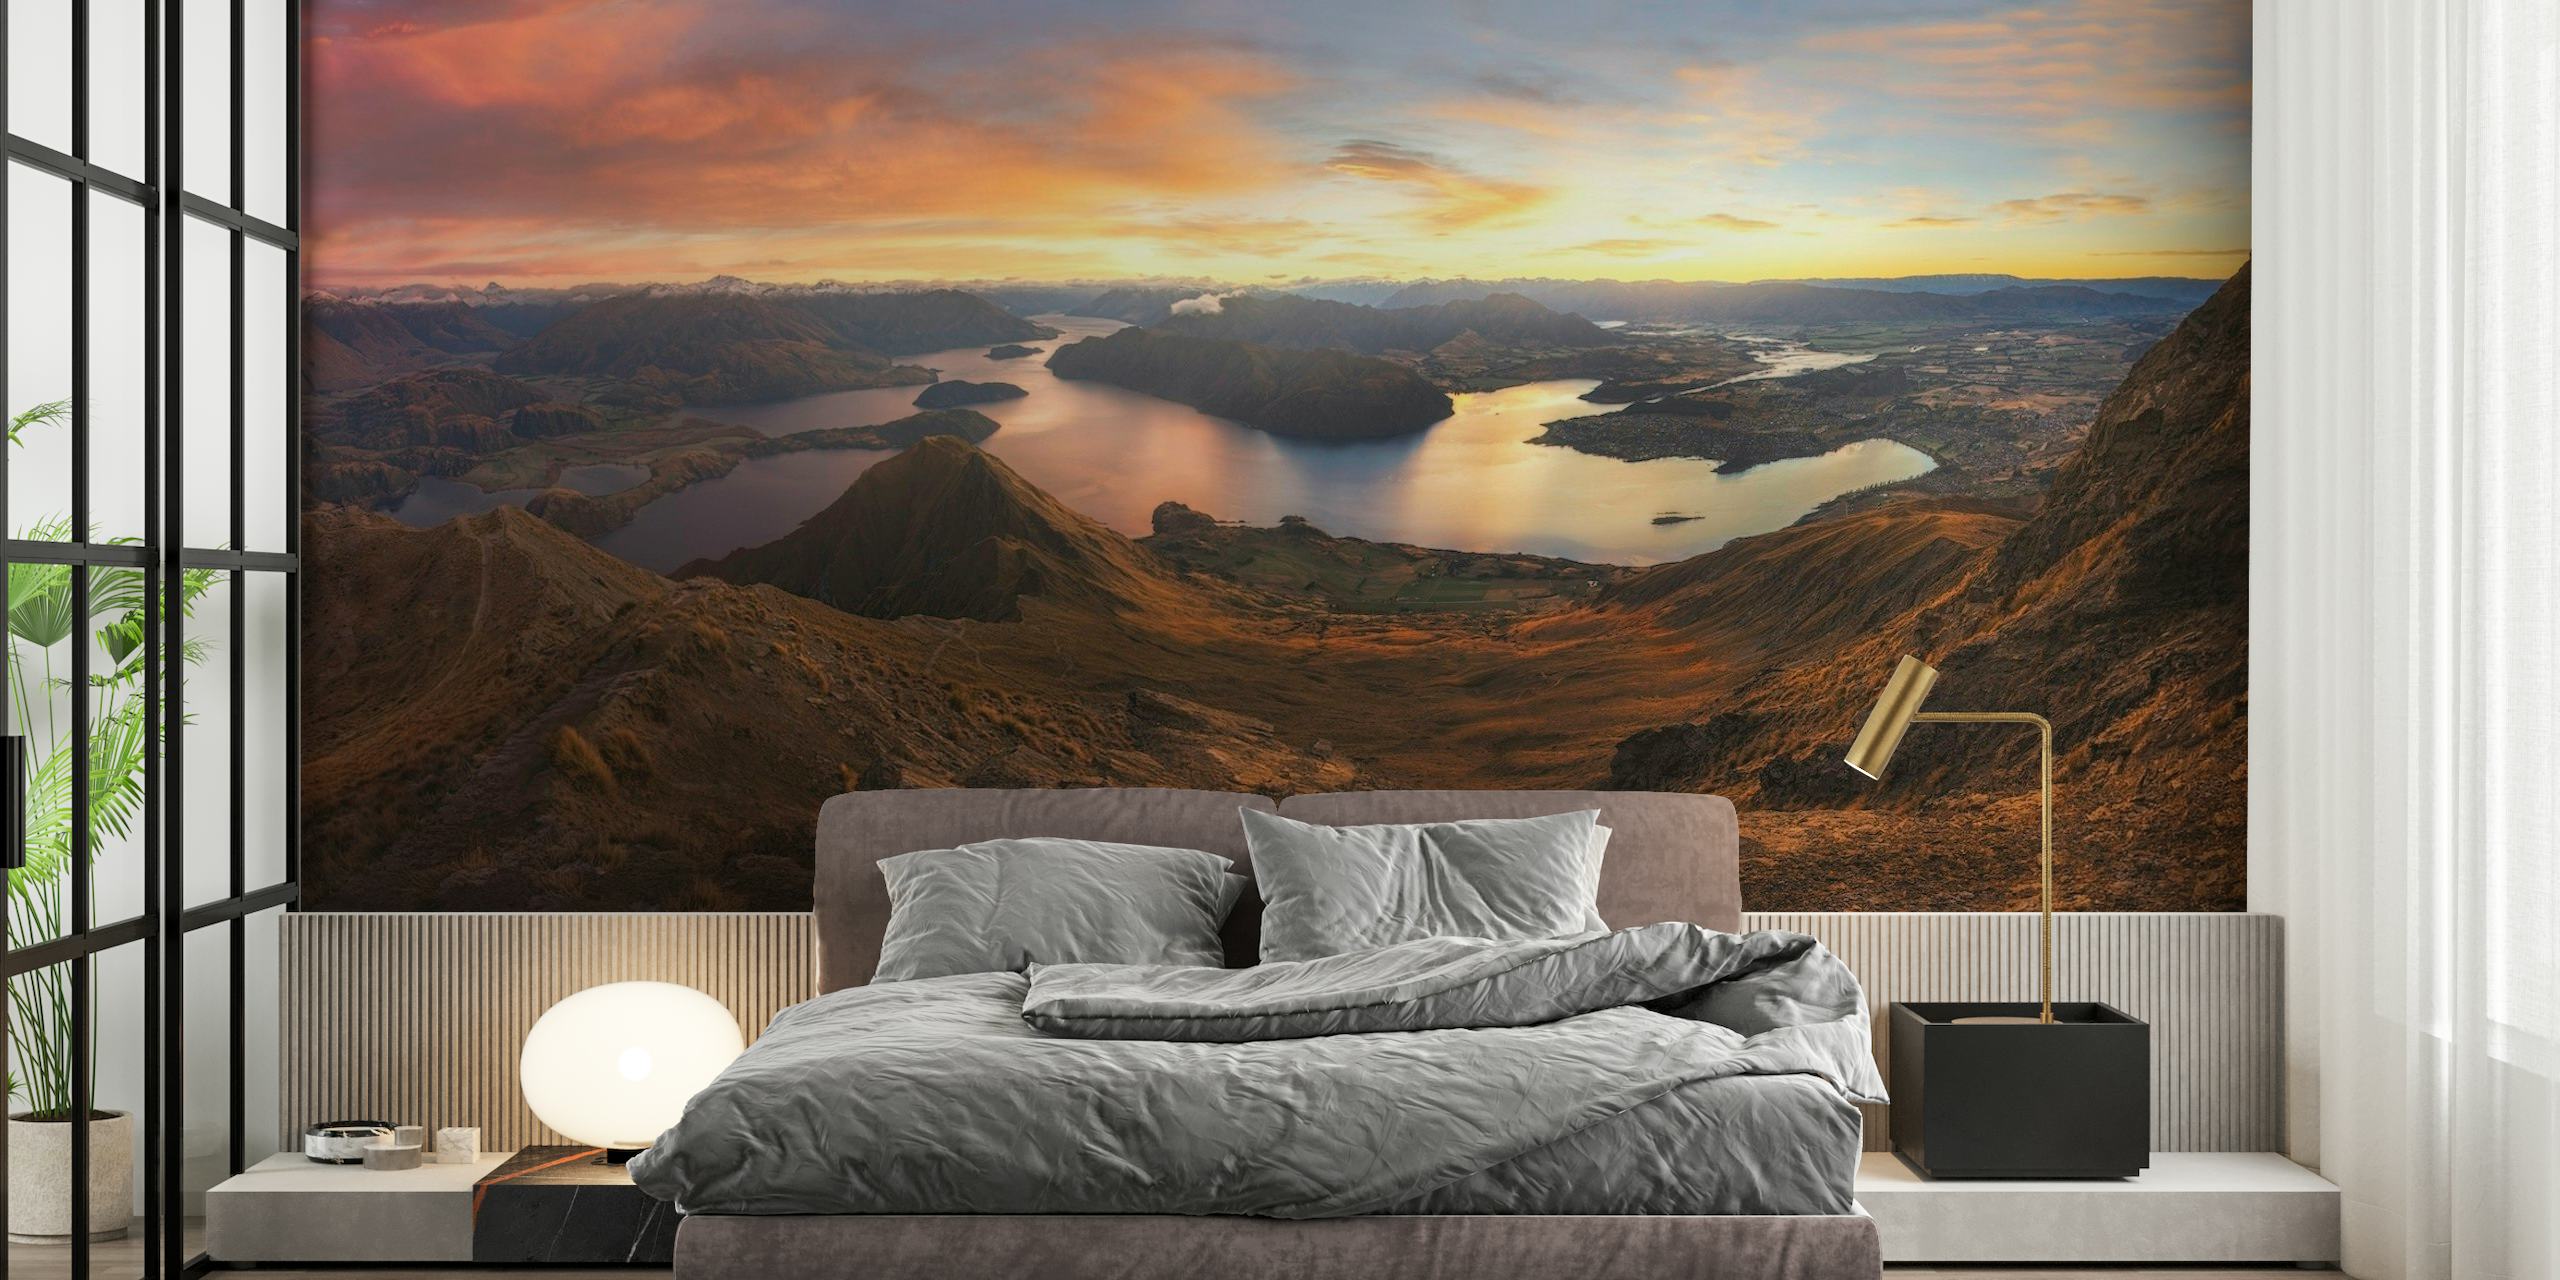 Roys Peak Panorama View wall mural featuring sunrise over a serene lake and rugged mountains.